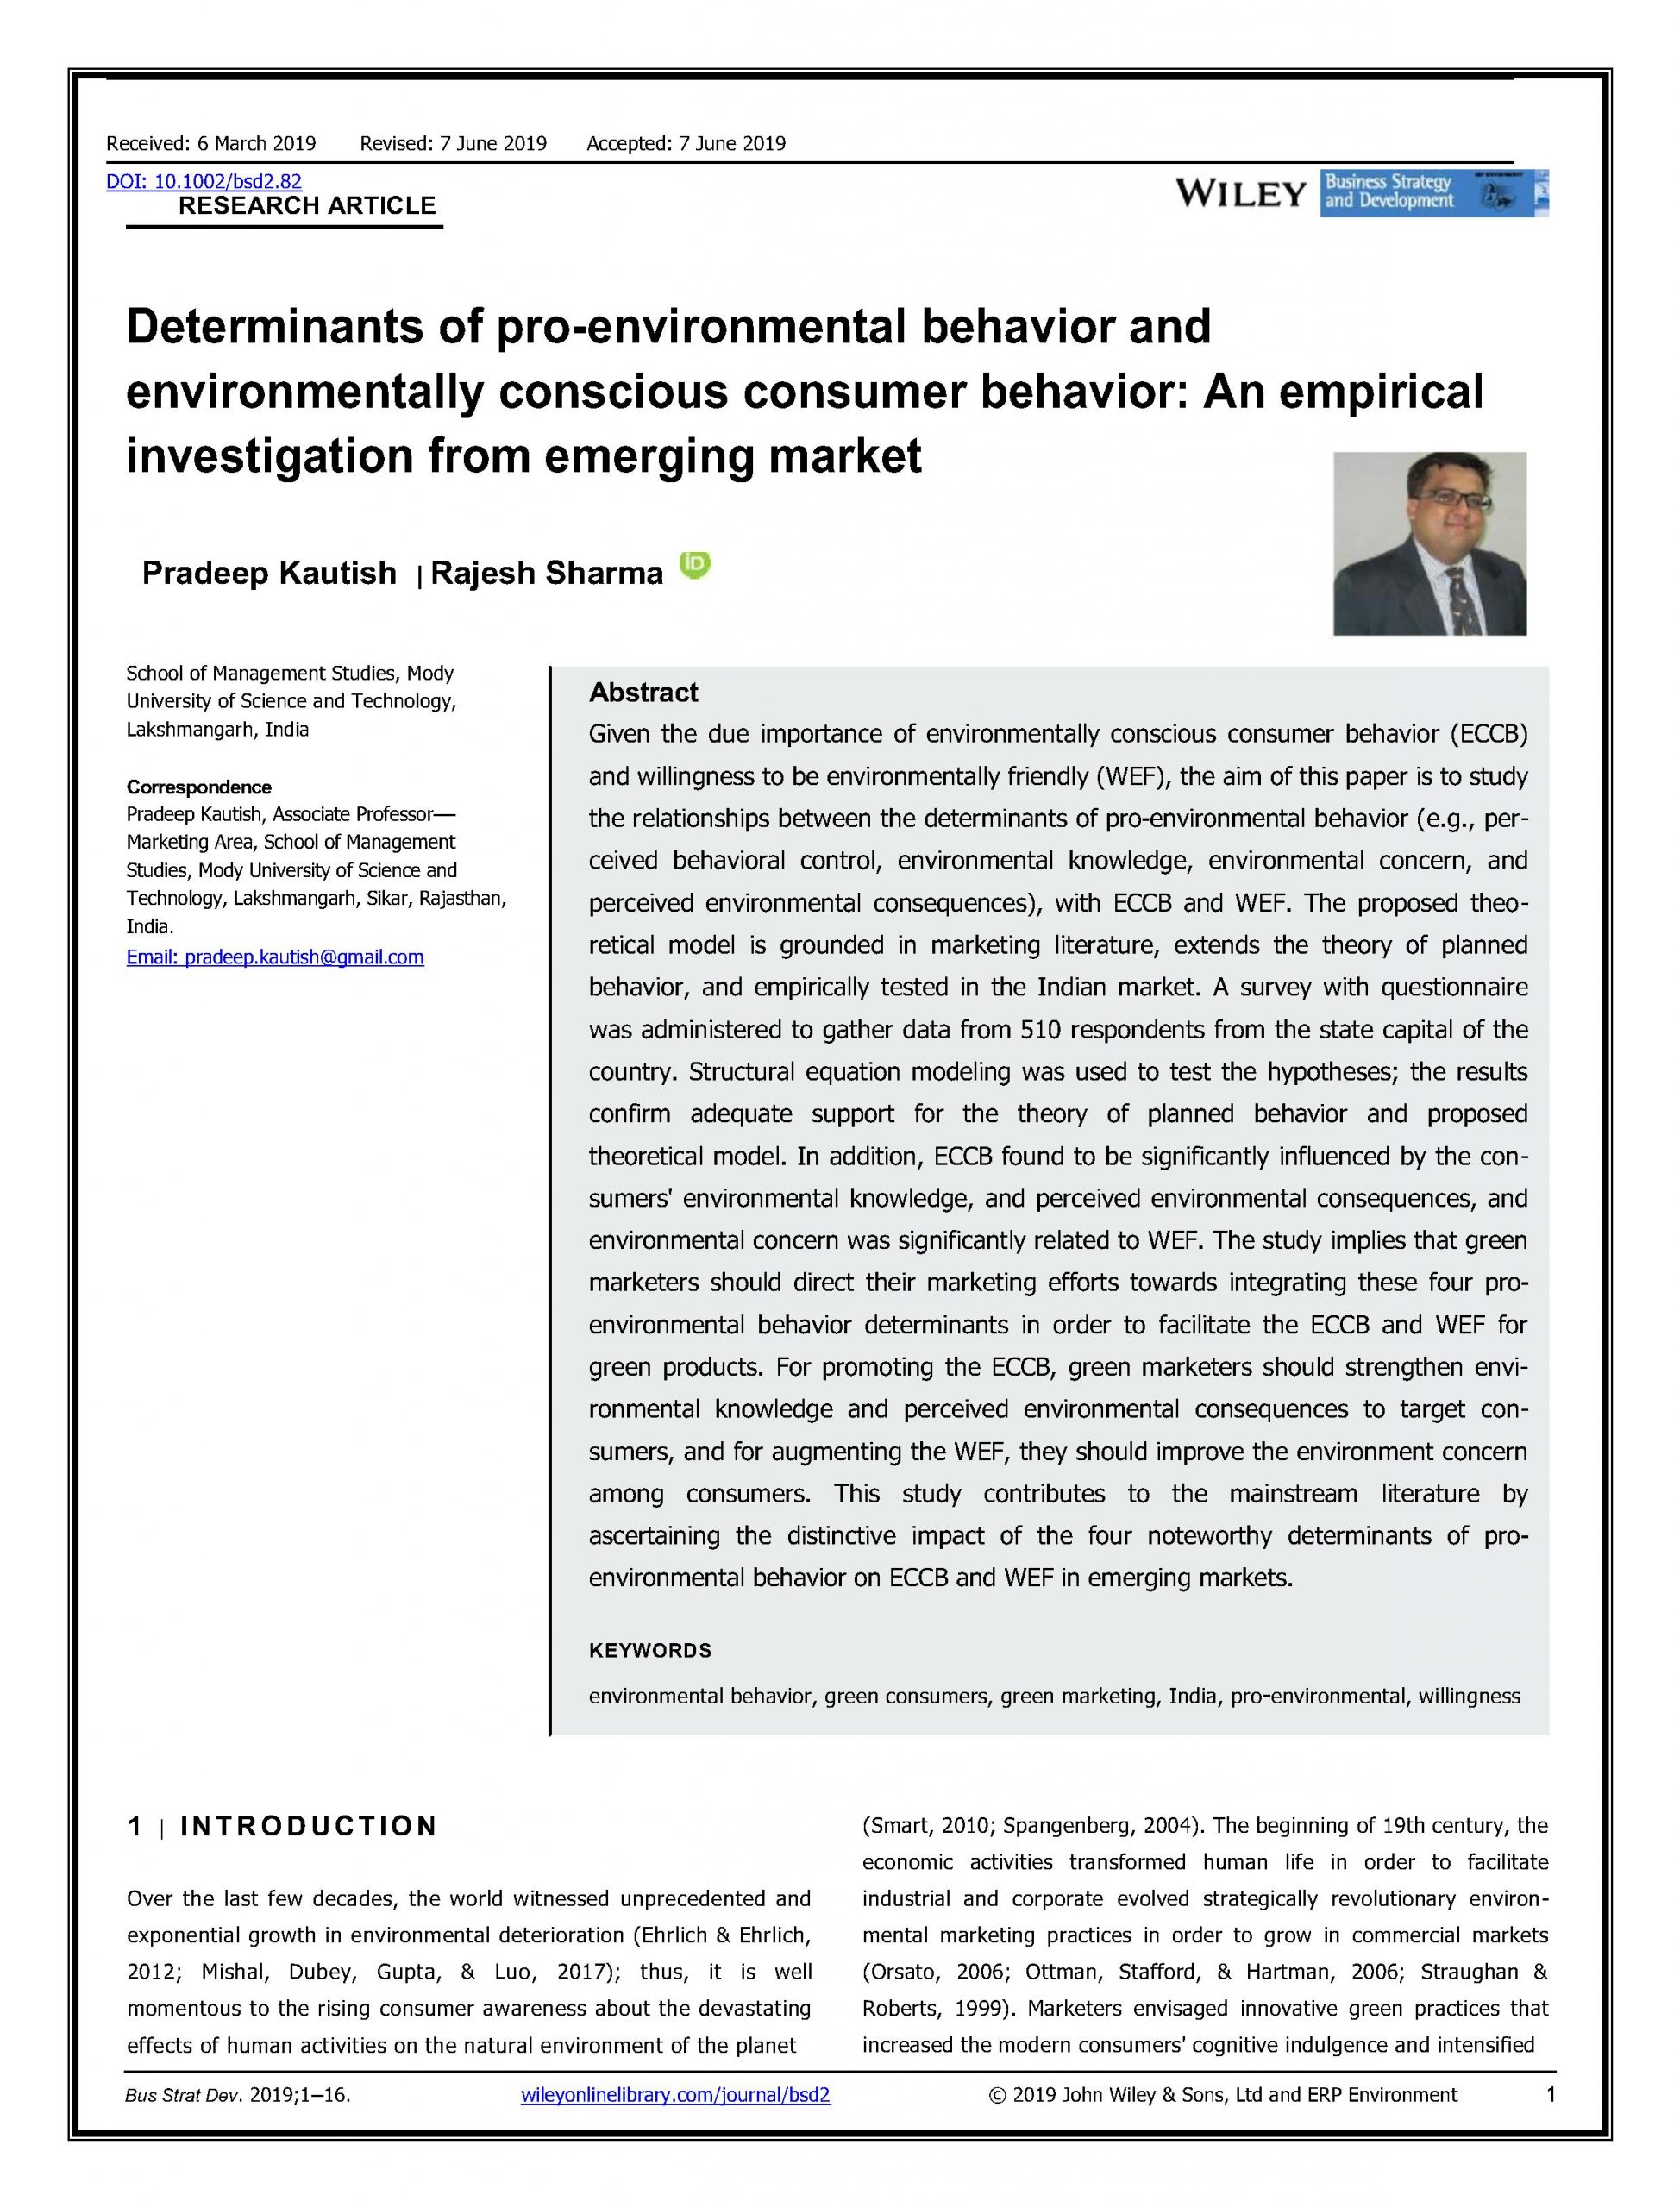 Determinants of pro-environmental behavior and environmentally conscious consumer behavior: An empirical investigation from emerging market